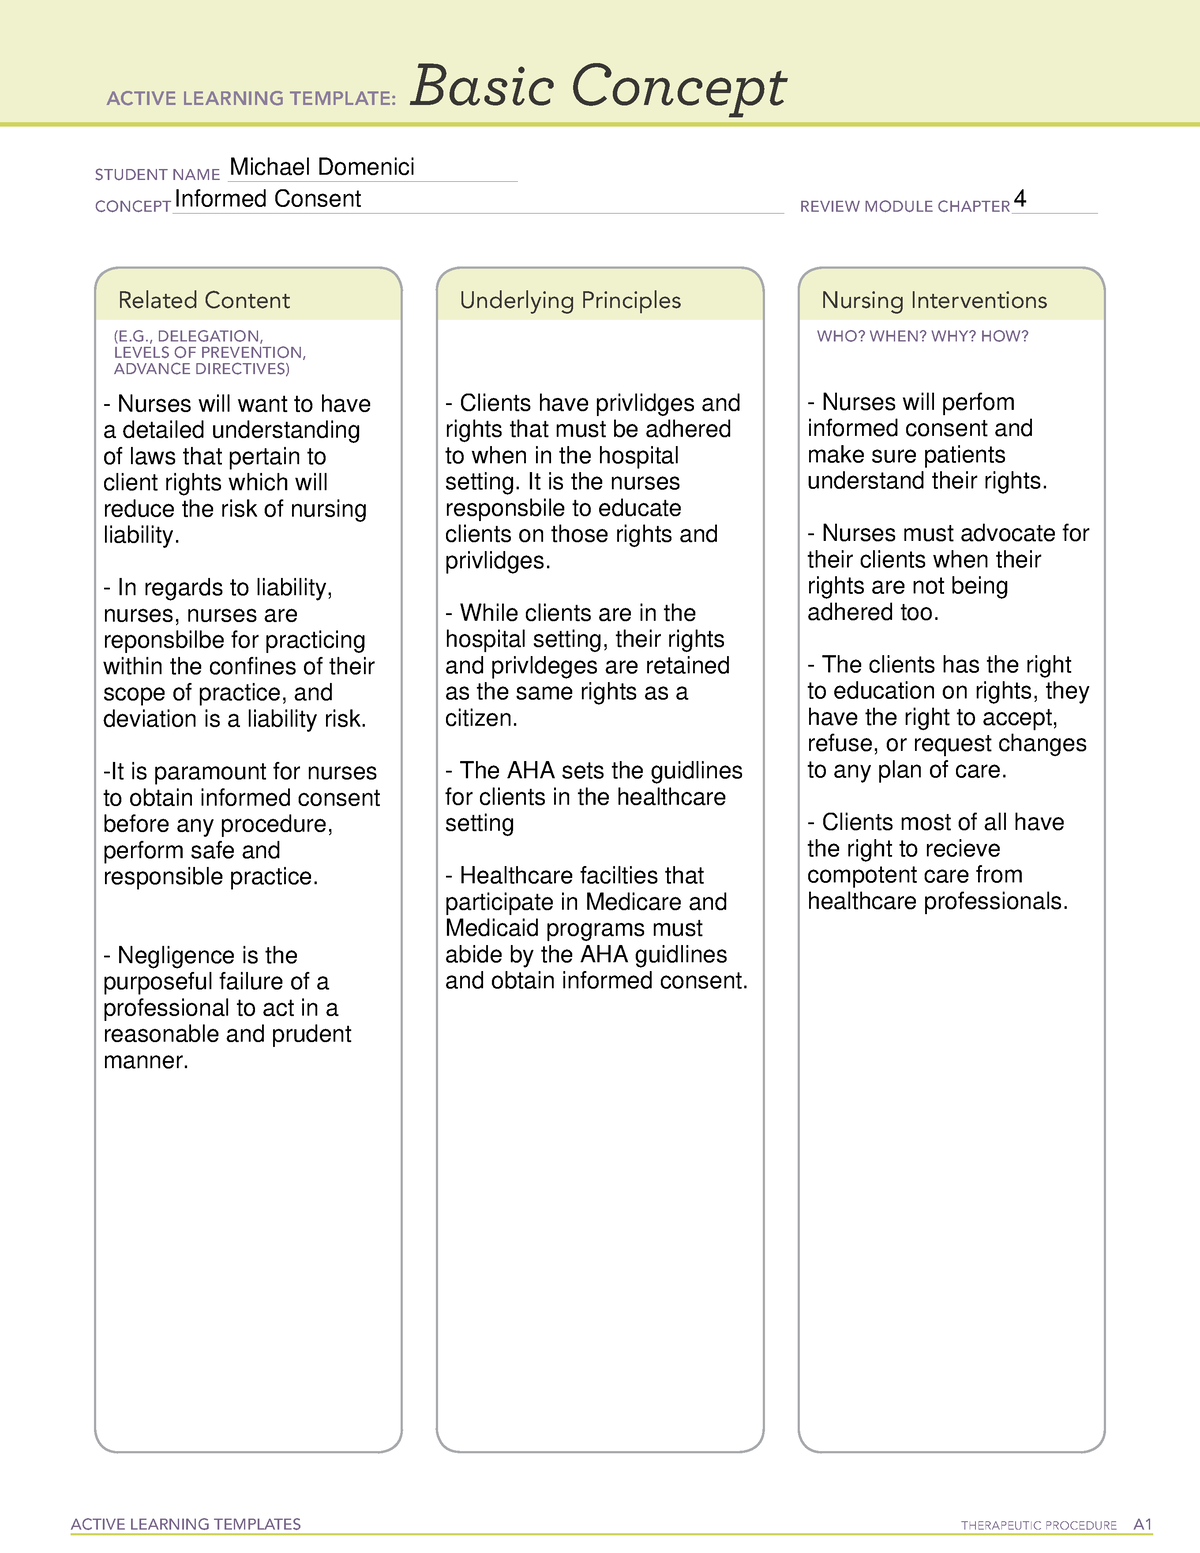 ati-active-learning-template-basic-concept-7-active-learning